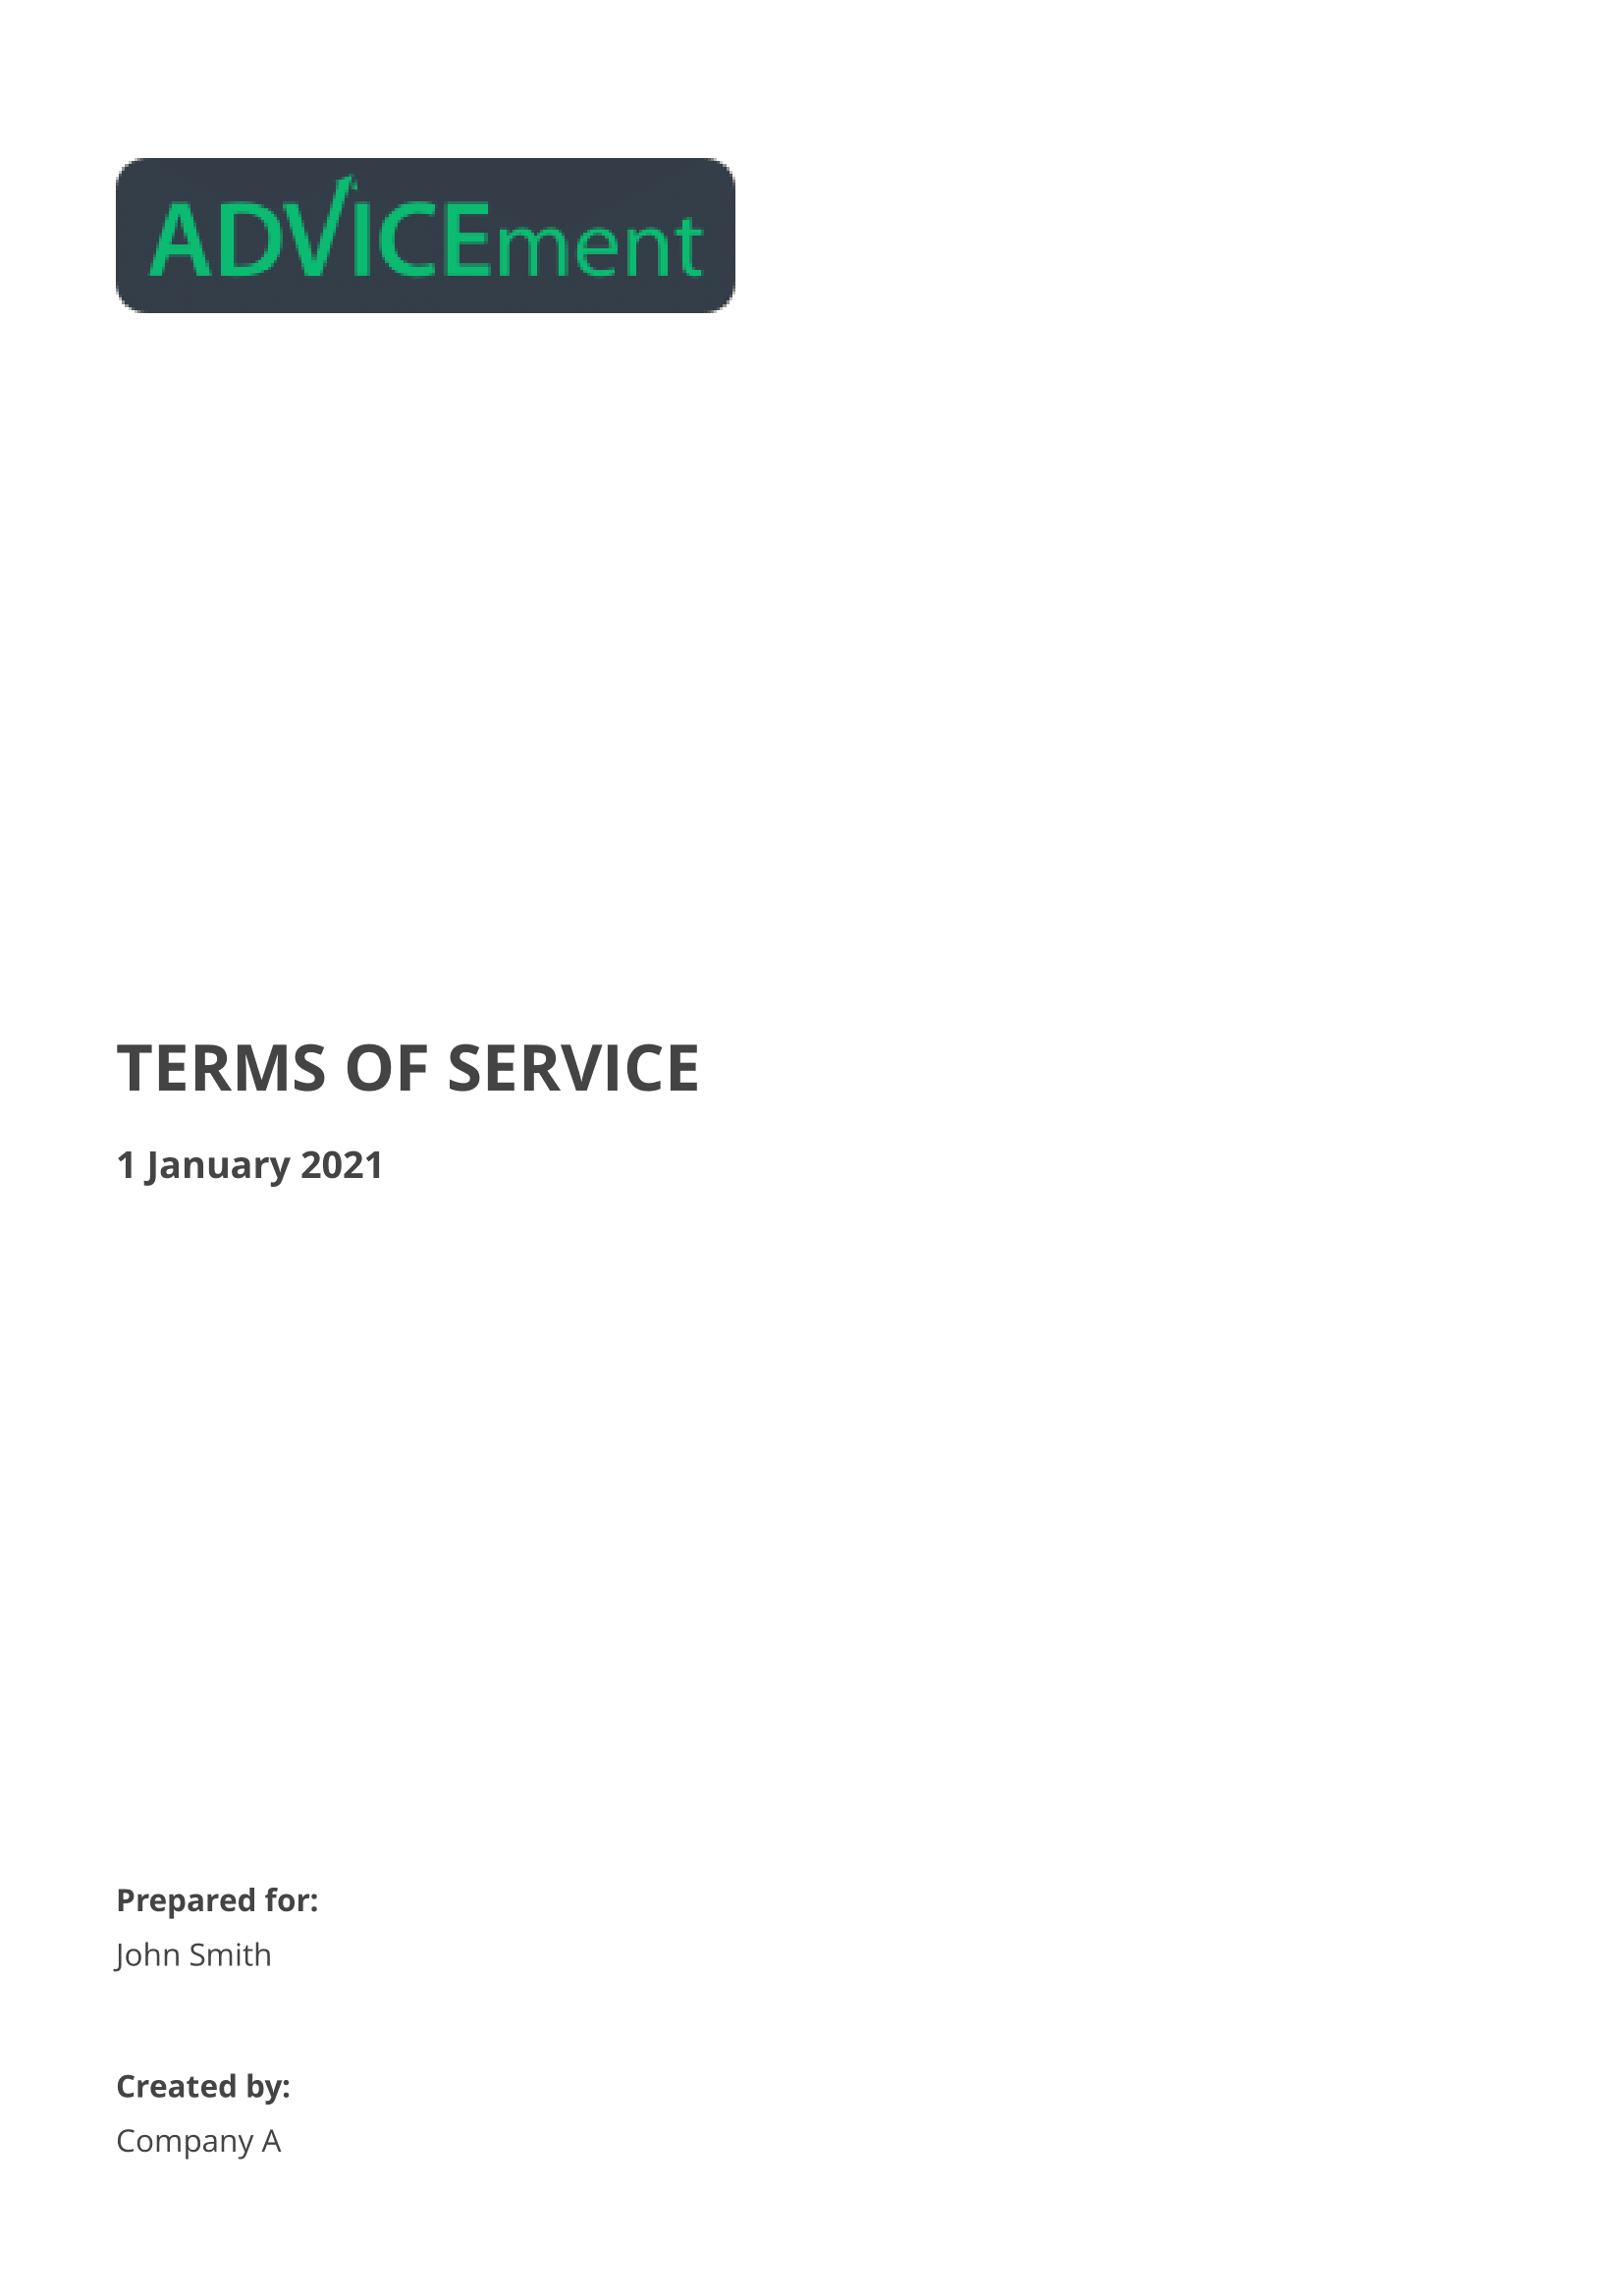 Terms of Service Template v1